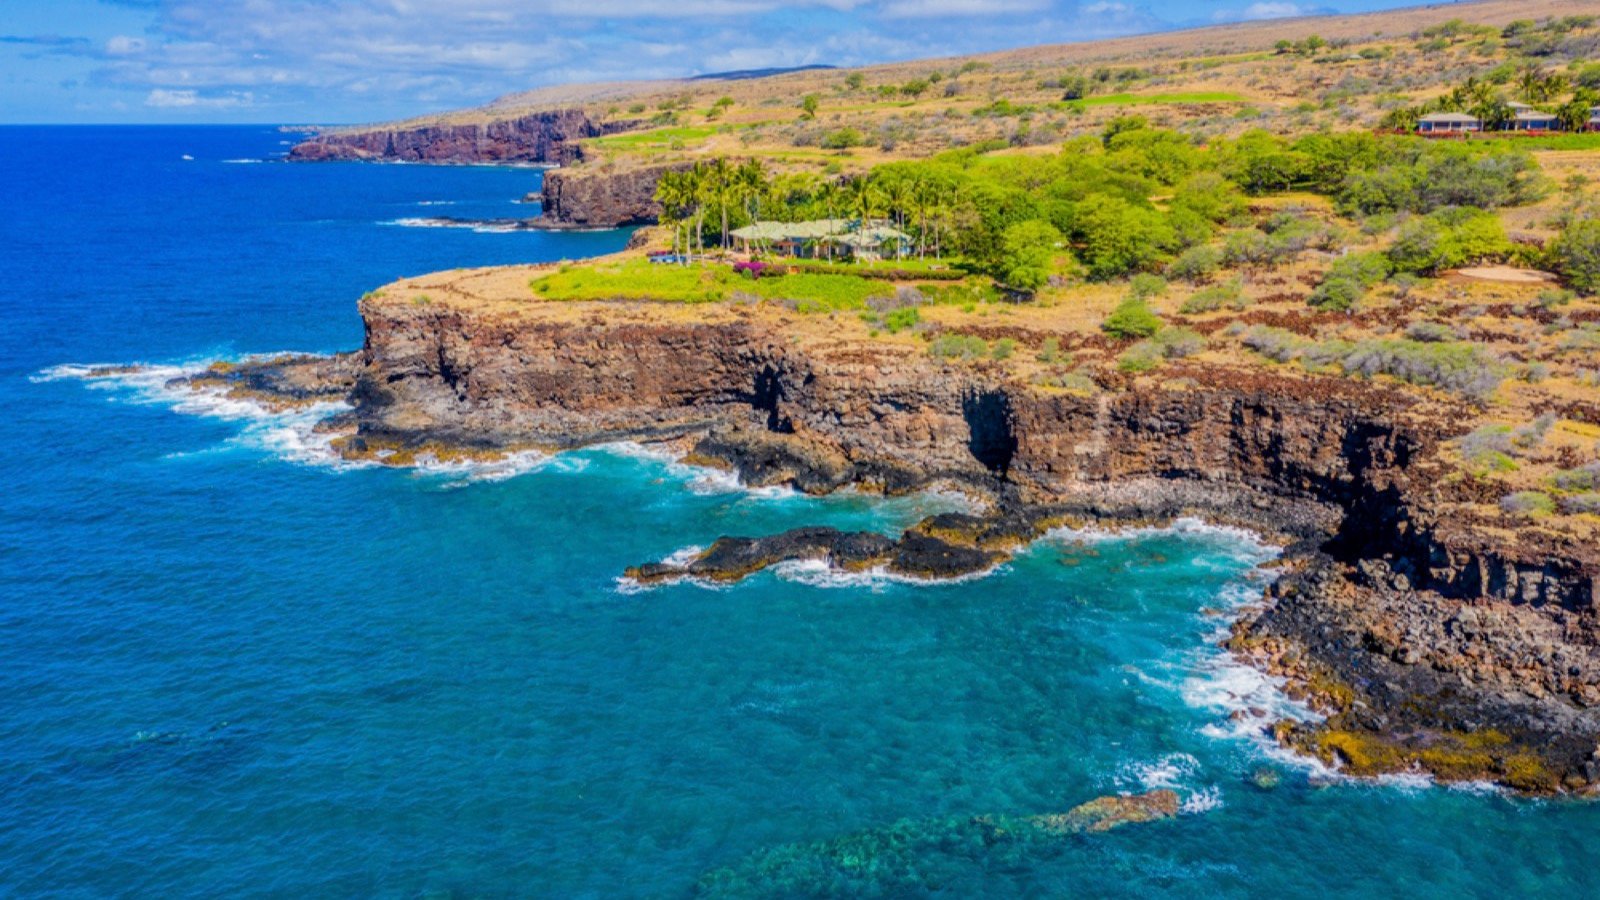 <p>Lanai is a popular destination for honeymooners because it’s romantic and magical. Finding a spot in Hawaii that isn’t stunning is tough, but Lanai is special. We recommend this island for those who want a luxury getaway.</p><p>There are five-star hotels and dining options, exquisite sunsets, pristine beaches, and more. If you want a romantic escape where you can pamper one another and unwind, Lanai is ideal. Plus, you can always island hop to see the rest of the state.</p>